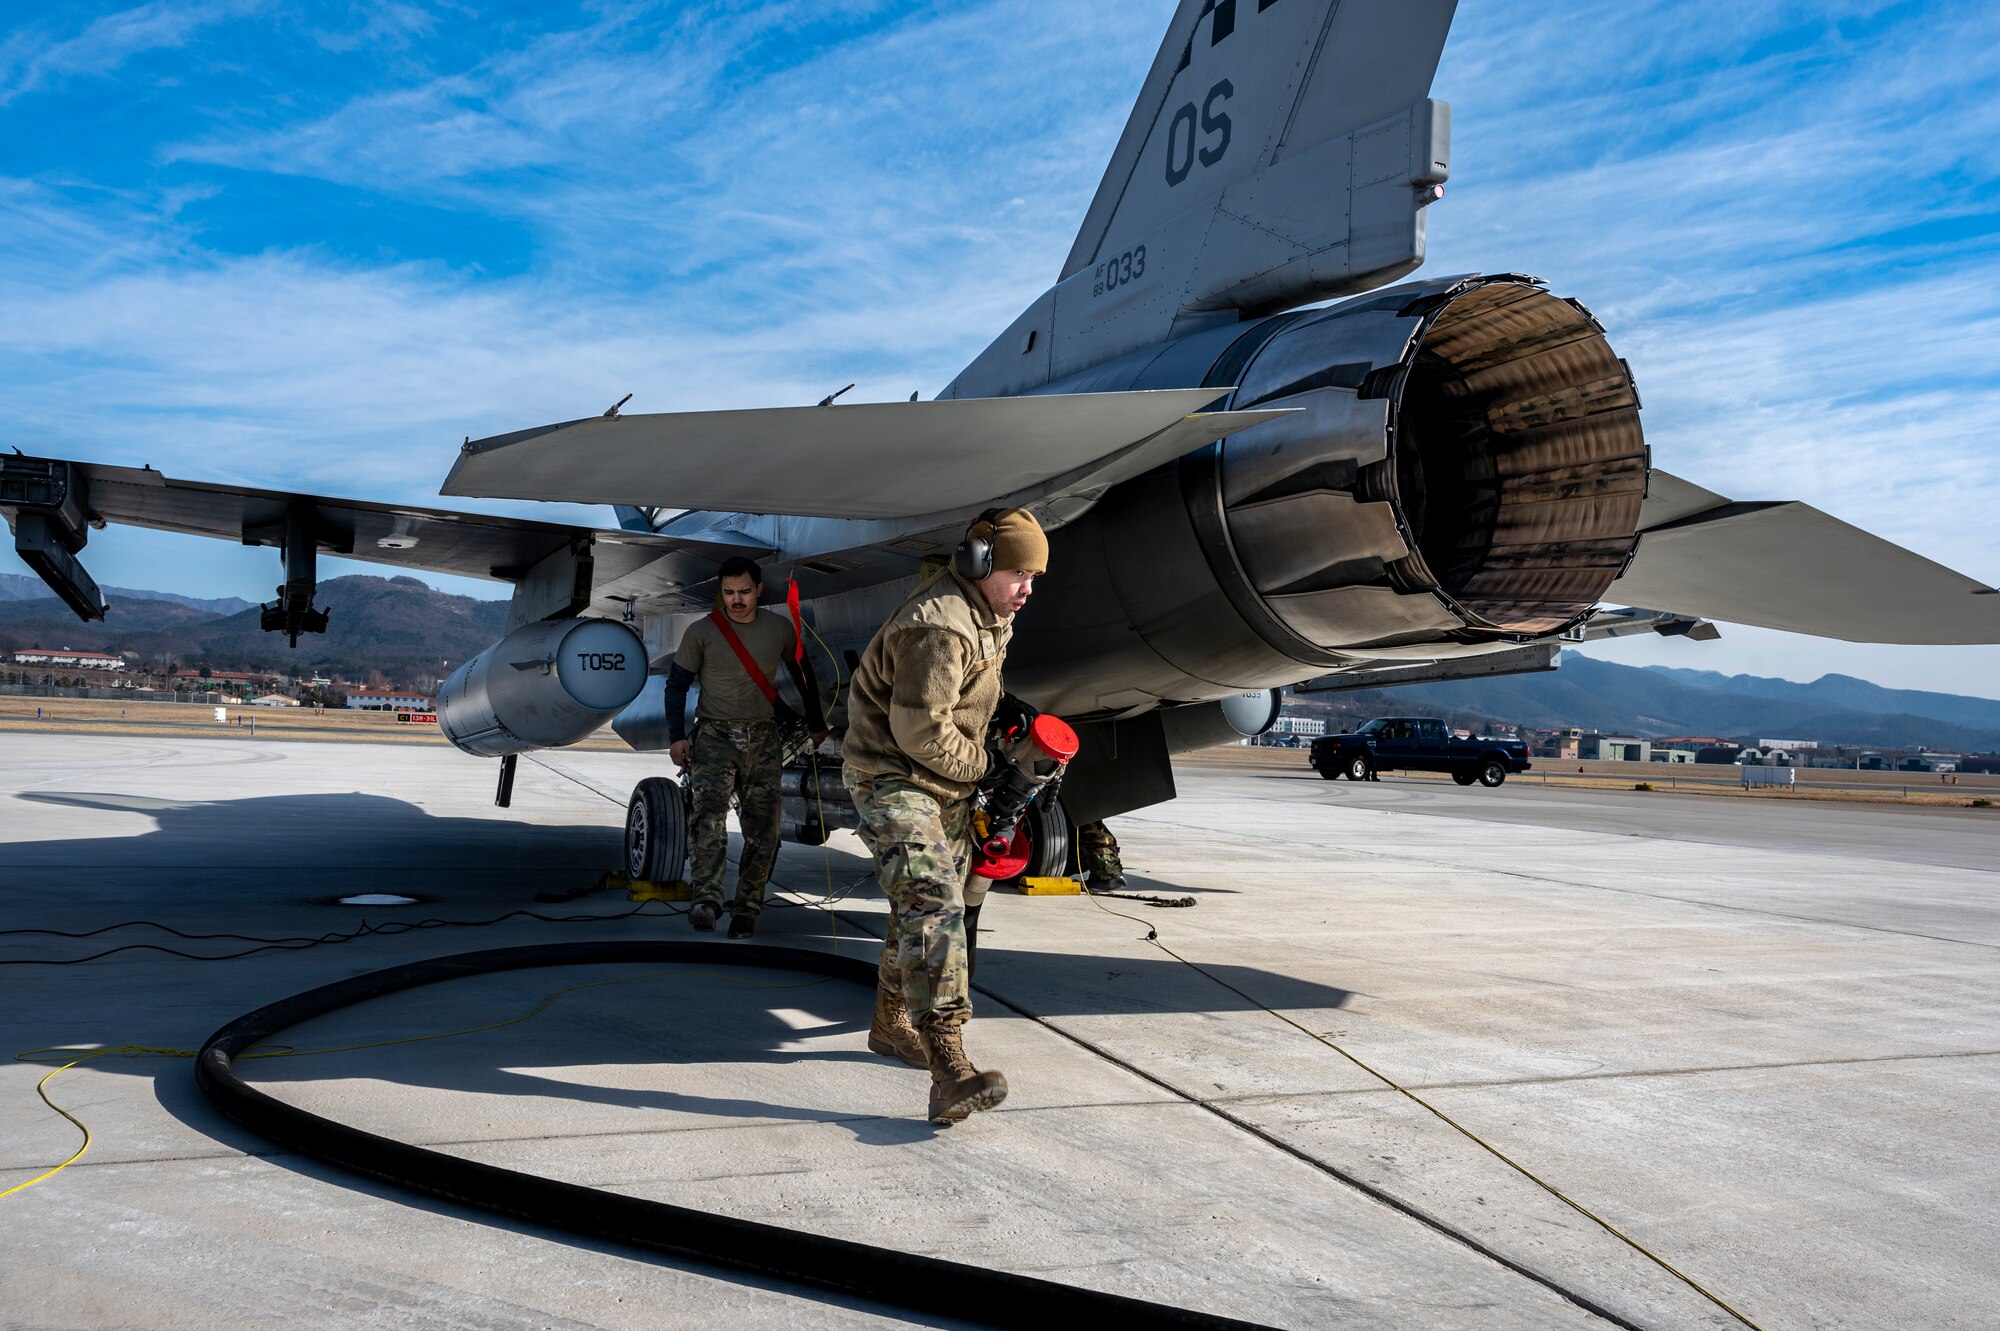 U.S. Air Force Senior Airman Brian Ramirez-Fontanez, 51st Logistics Readiness Squadron fuels service controller and Senior Airman Angel Fuentes, 36th Fighter Generation Squadron crew chief, refuel an F-16 Fighting Falcon, prior to launching at Daegu Air Base, Republic of Korea, Jan. 31, 2023.